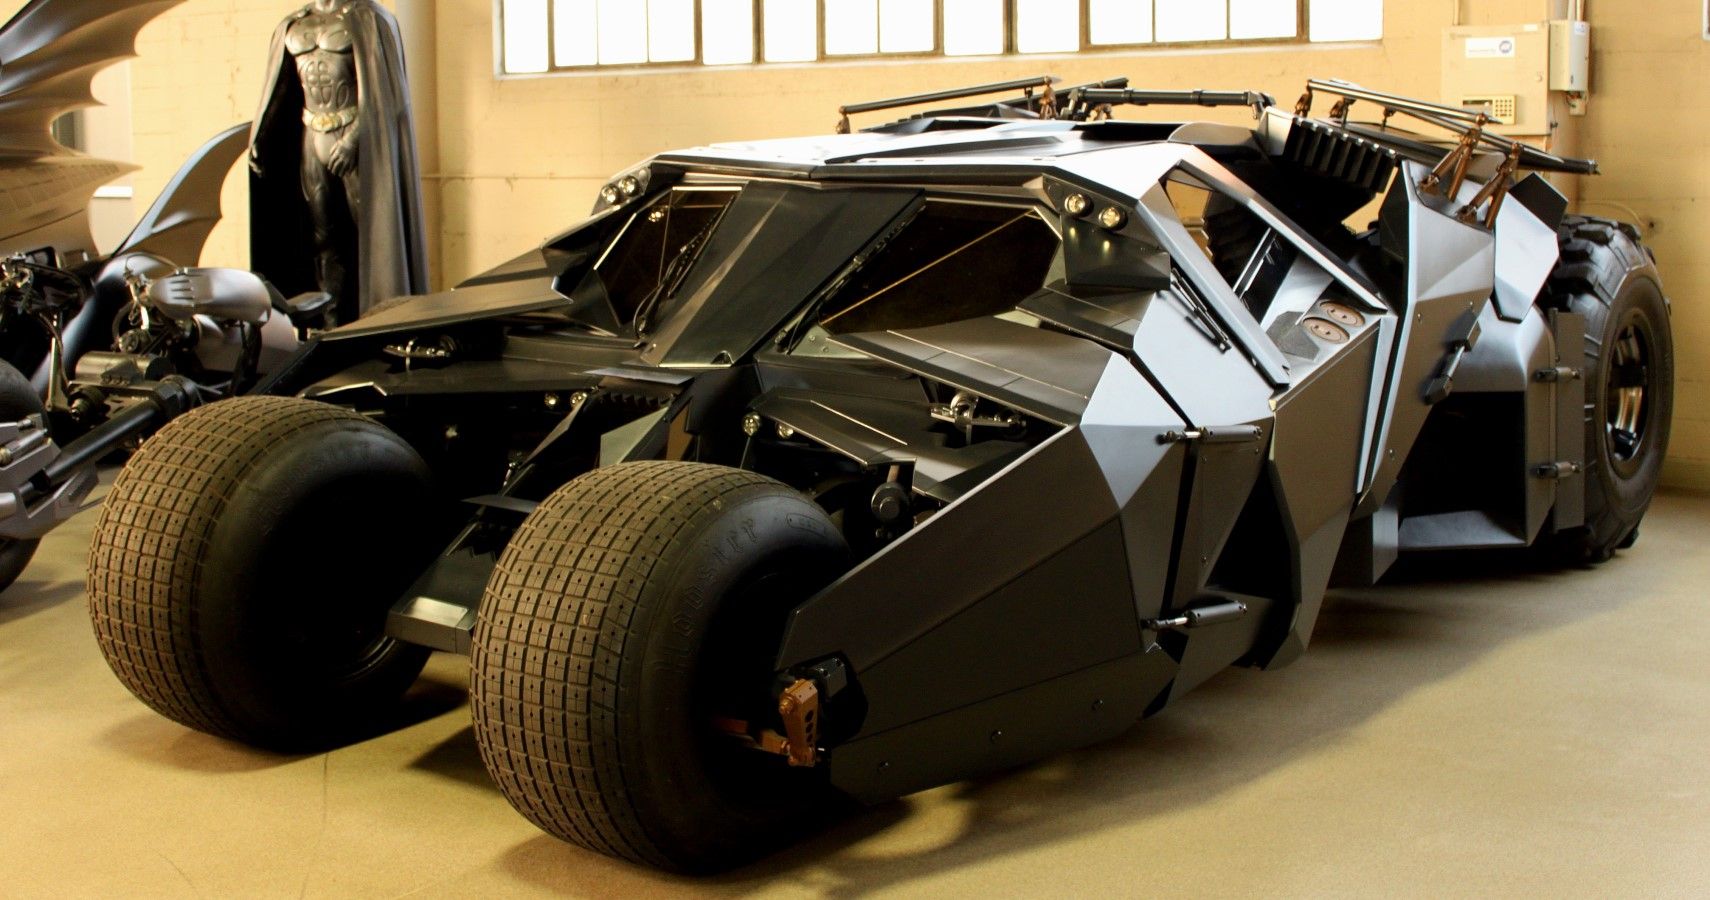 skære halt episode Here's How Much It Cost To Build The Stealthy And Badass Tumbler Batmobile